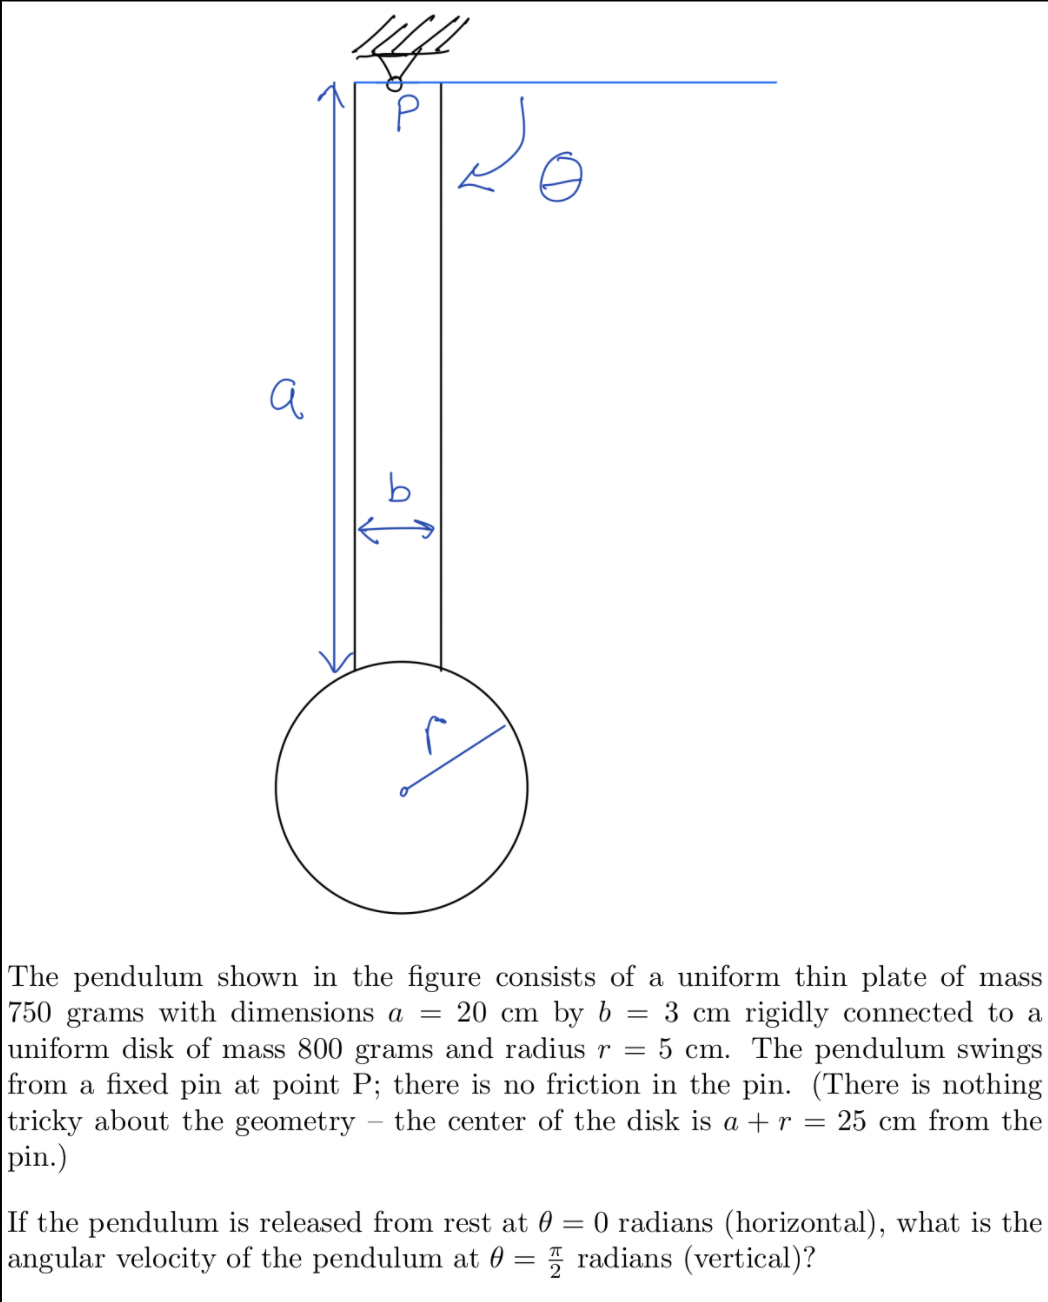 a
The pendulum shown in the figure consists of a uniform thin plate of mass
750 grams with dimensions a = 20 cm by b = 3 cm rigidly connected to a
uniform disk of mass 800 grams and radius r
from a fixed pin at point P; there is no friction in the pin. (There is nothing
tricky about the geometry
pin.)
5 cm. The pendulum swings
the center of the disk is a + r = 25 cm from the
If the pendulum is released from rest at 0
angular velocity of the pendulum at 0
O radians (horizontal), what is the
* radians (vertical)?
